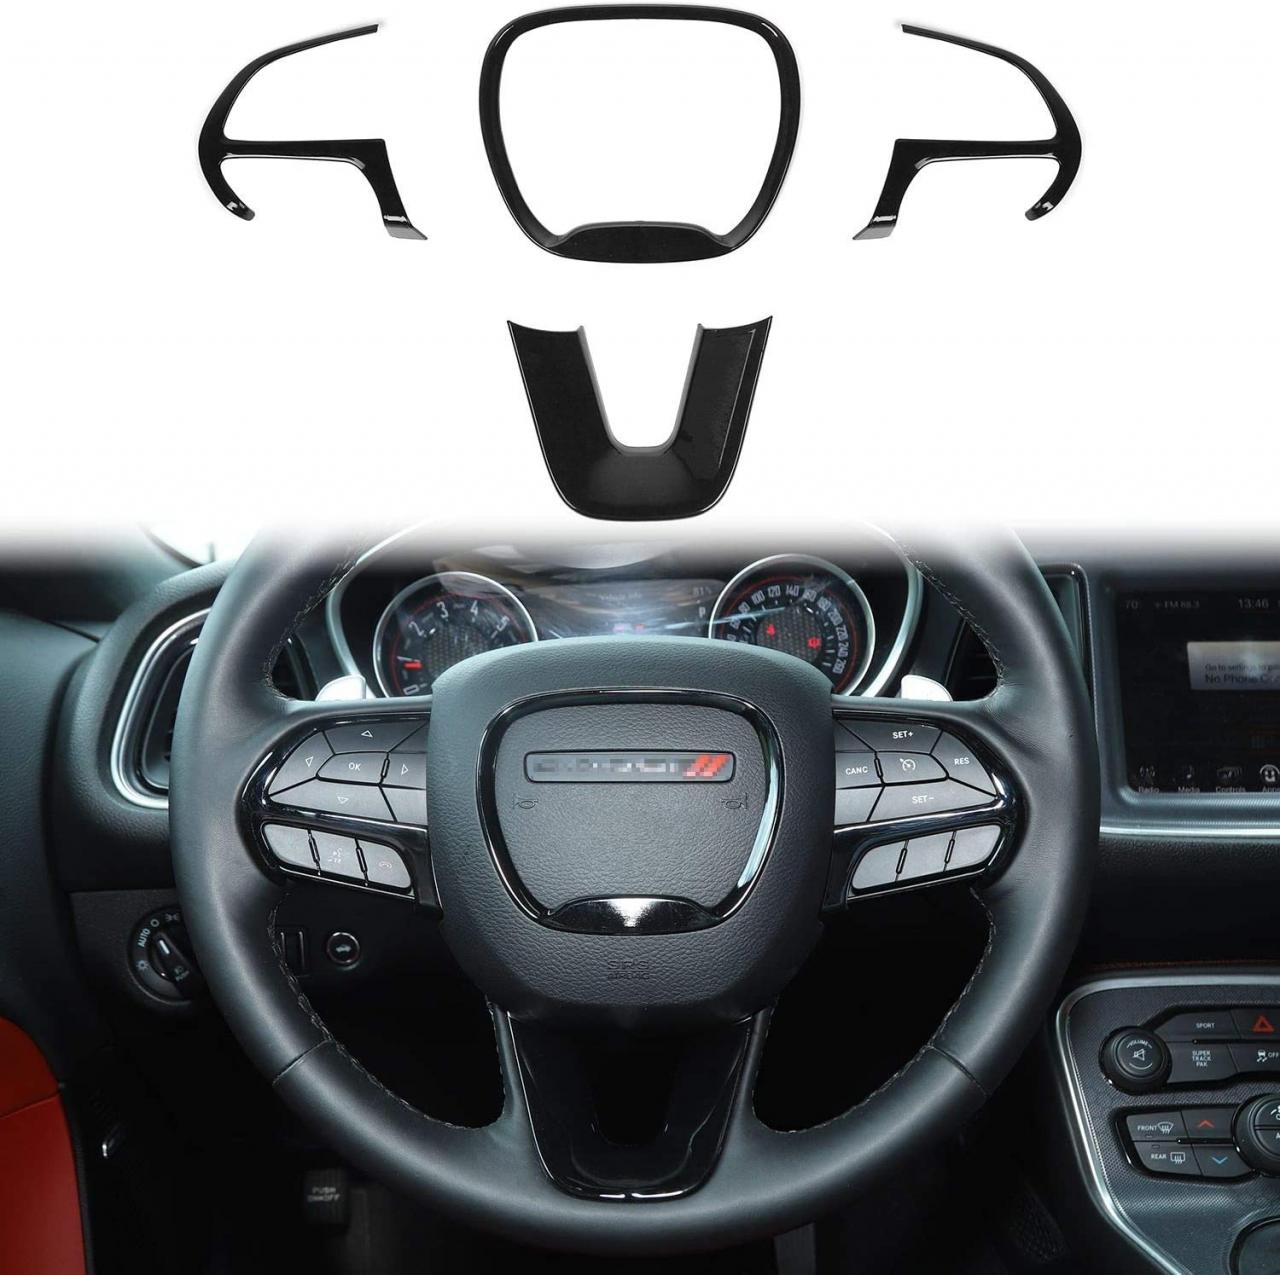 Buy Voodonala Steering Wheel Trim for 2015-2020 Dodge Challenger Charger,  for 2014-2020 Dodge Durango for Jeep Grand Cherokee SRT8, ABS Black 4pcs  Online in Indonesia. B08DR5FR4P